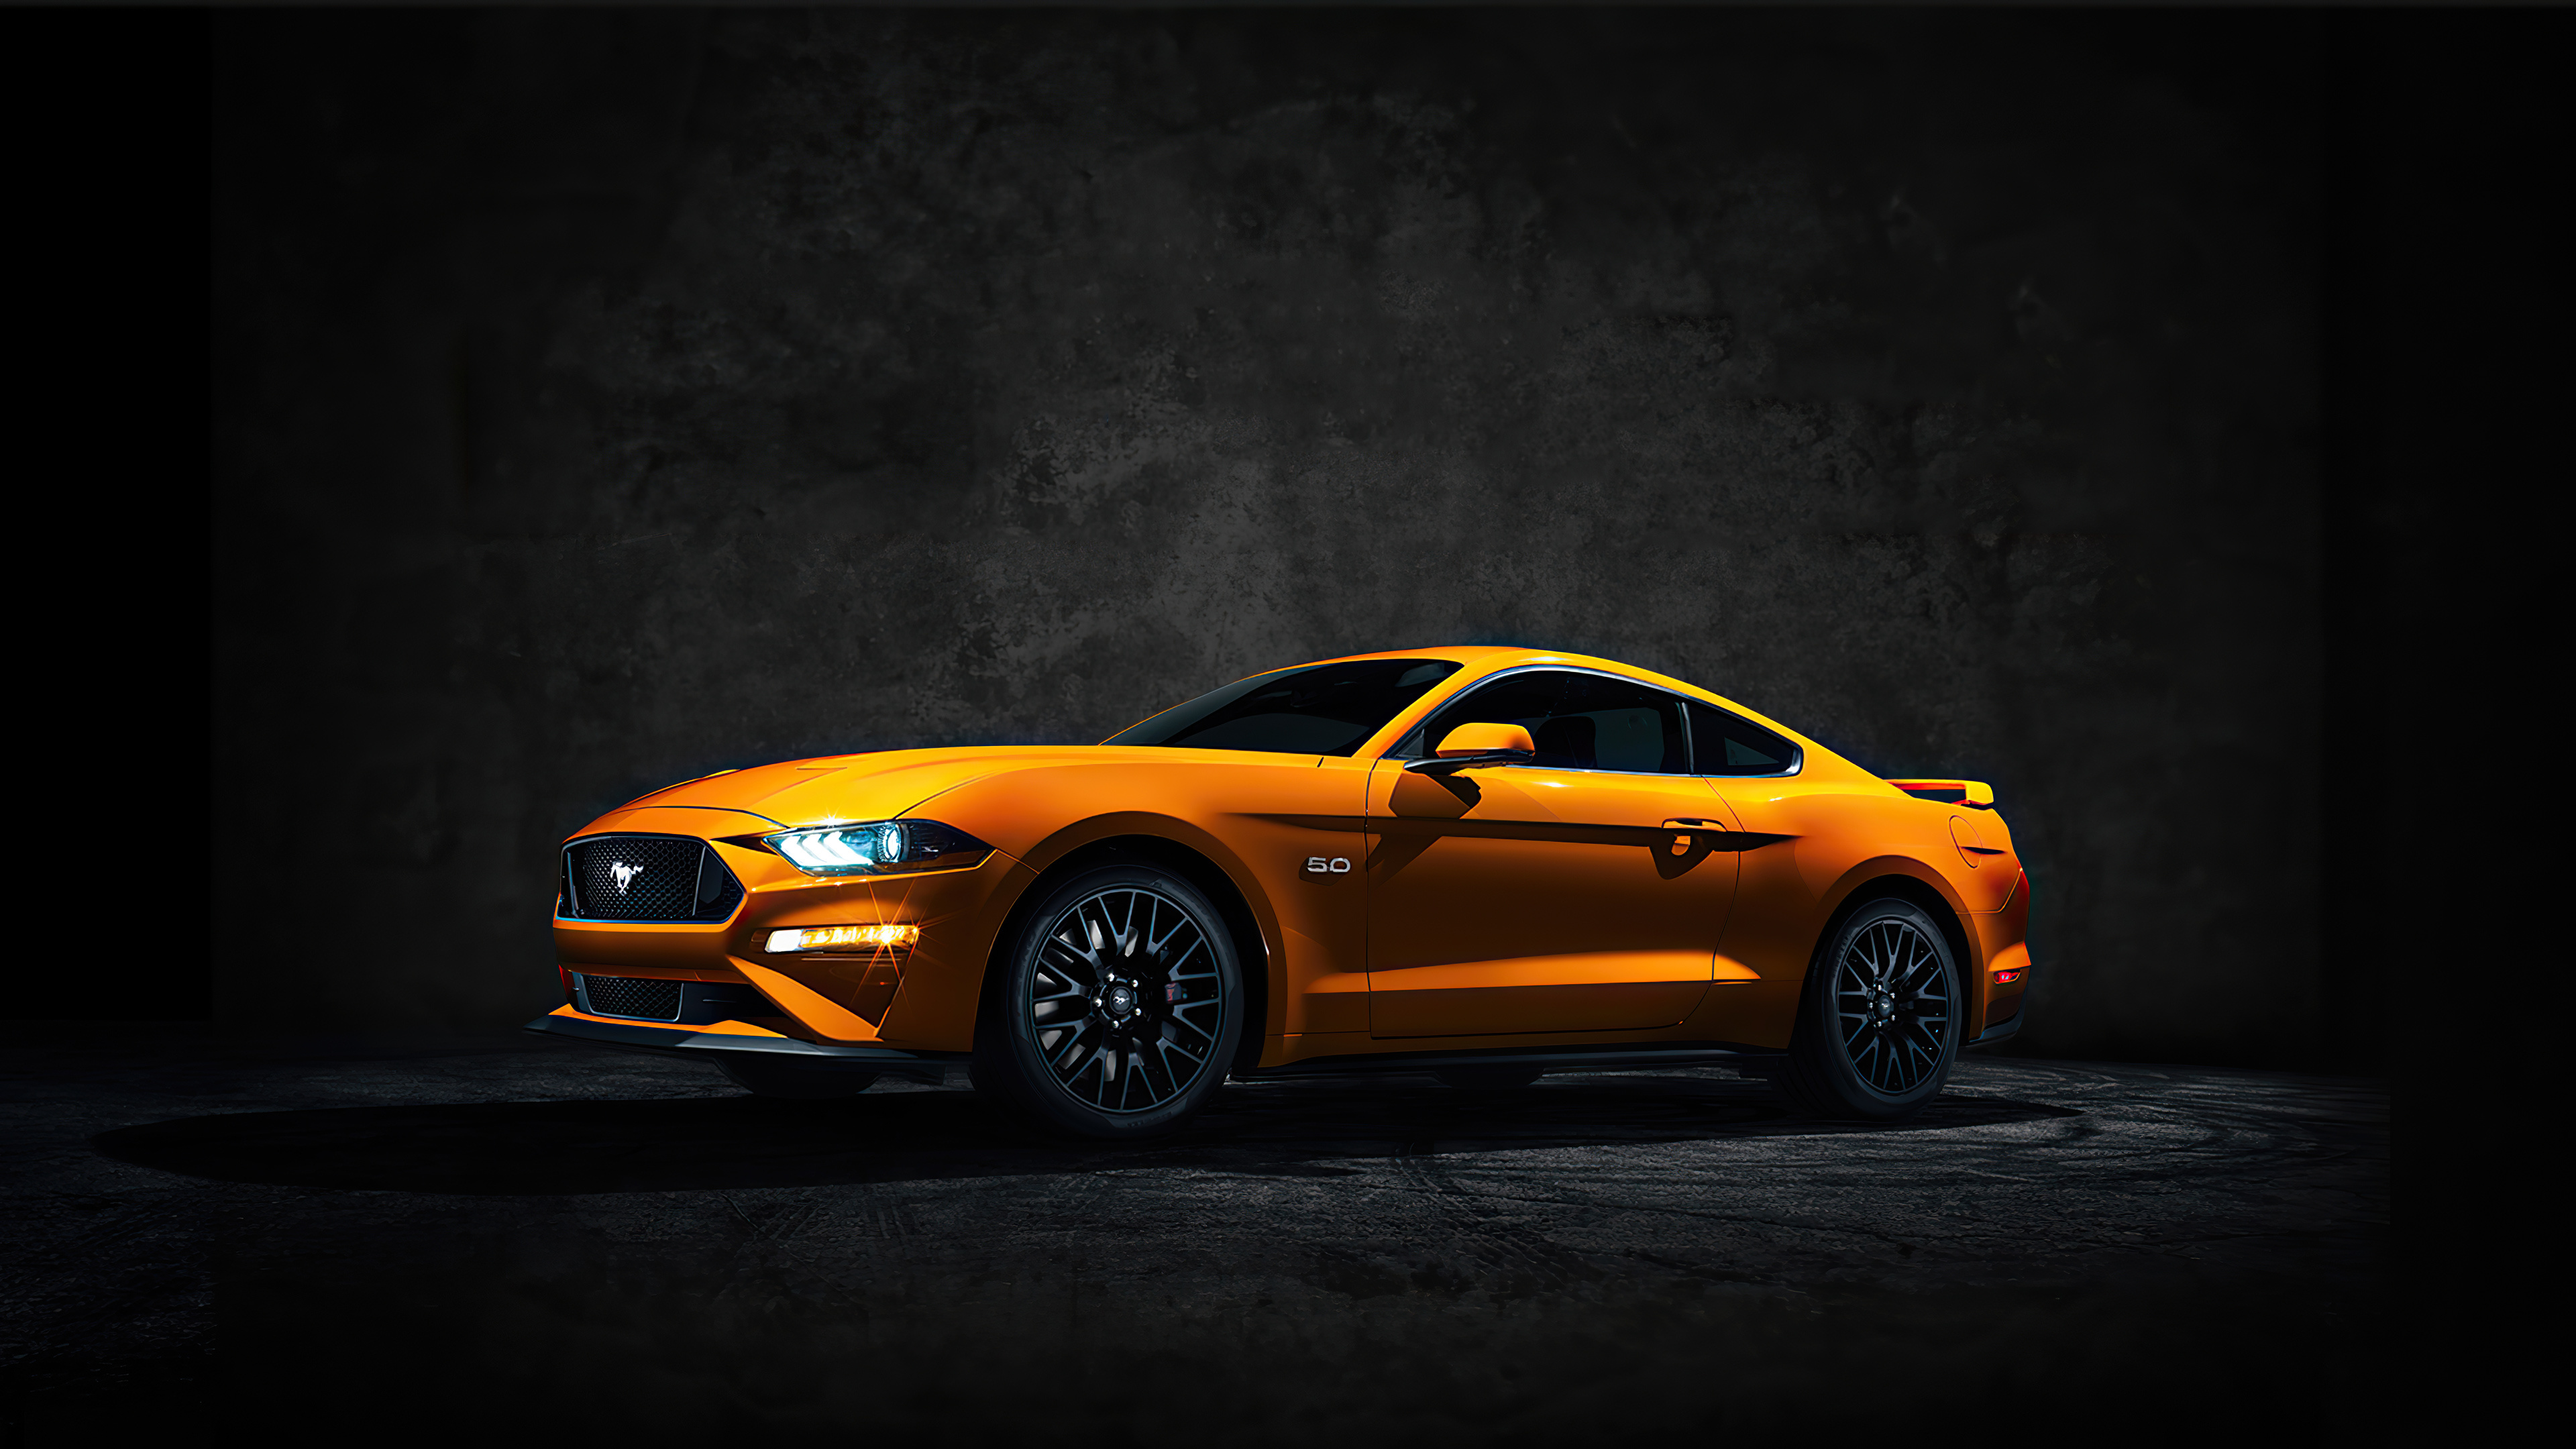 Ford Mustang: The best all-around muscle car of the 21st century, 2020 model. 3840x2160 4K Background.